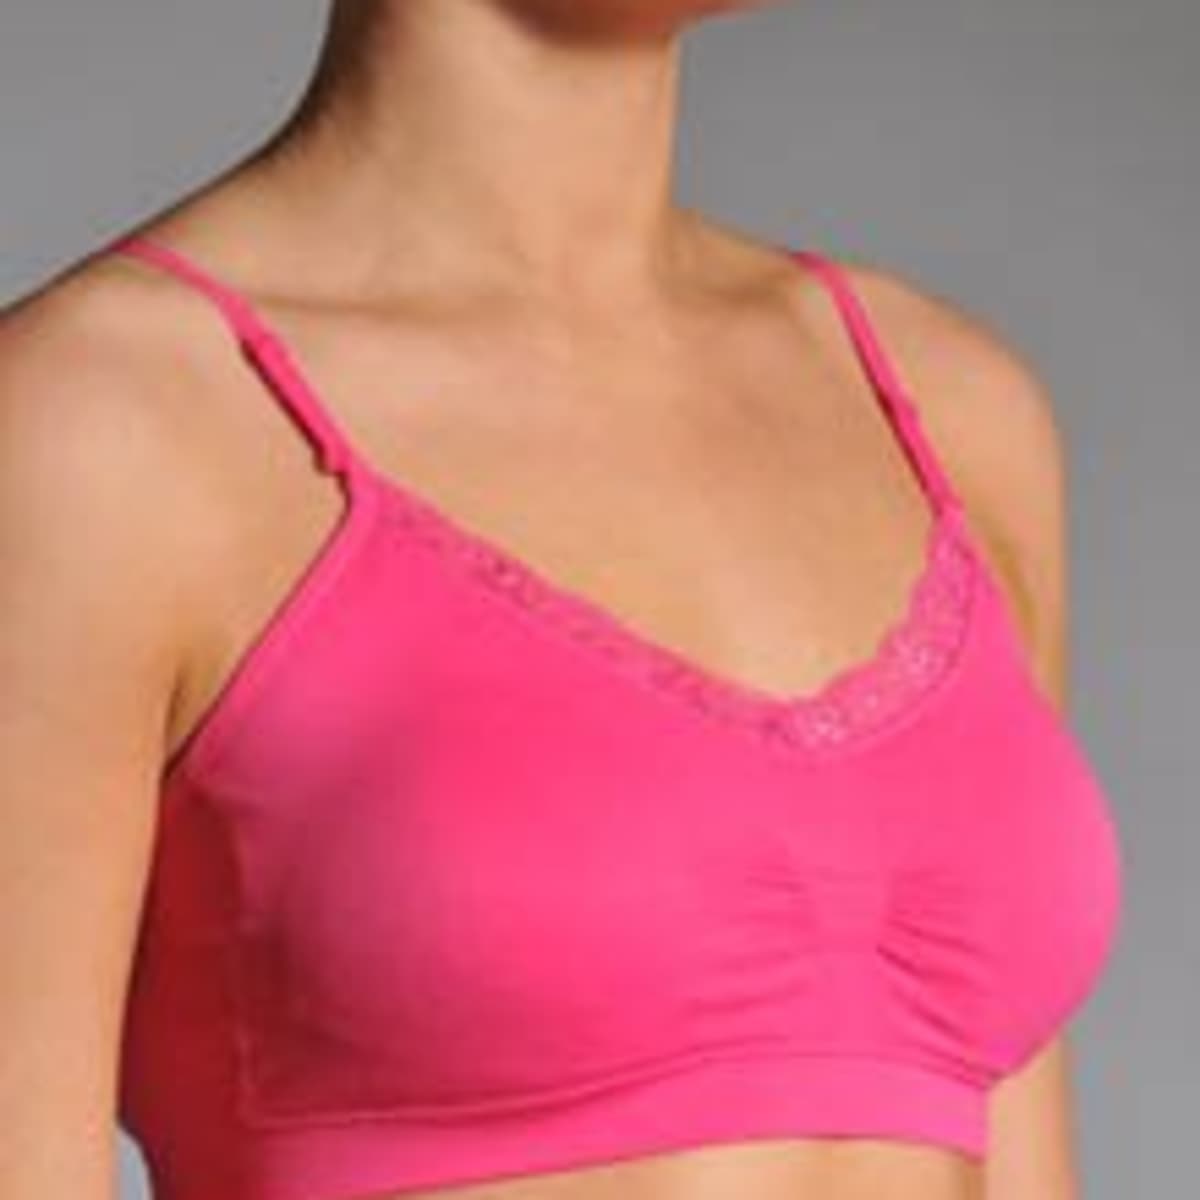 How to Wear a Bra Correctly - HubPages